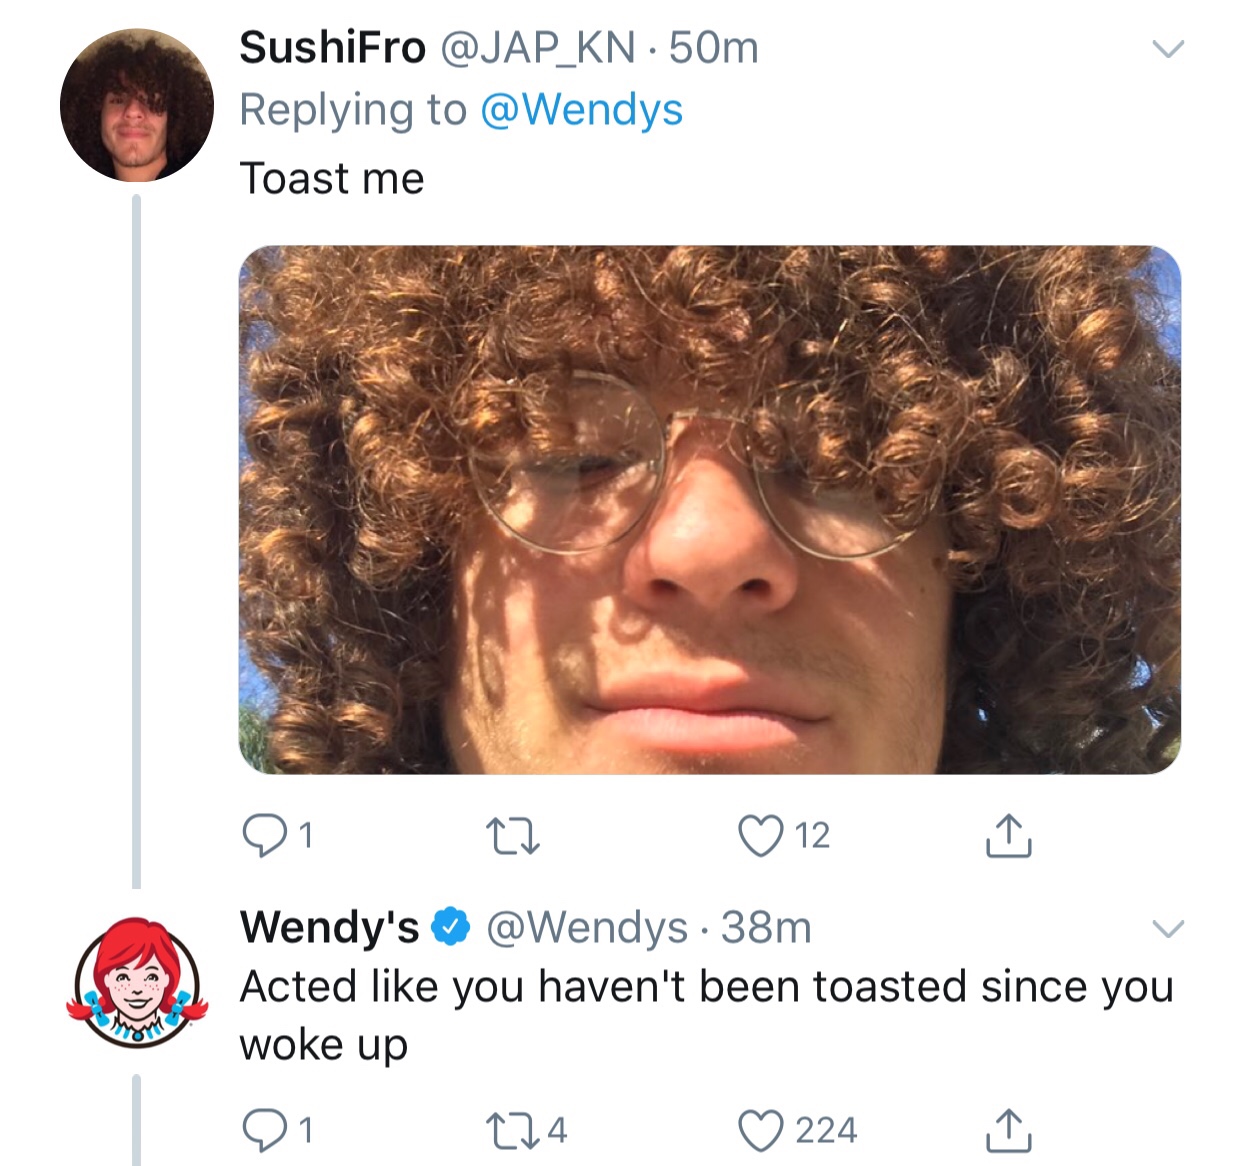 tweet - roasting people - SushiFro 50m Toast me 01 27 12 I Wendy's 38m Acted you haven't been toasted since you woke up 01 274 224 i